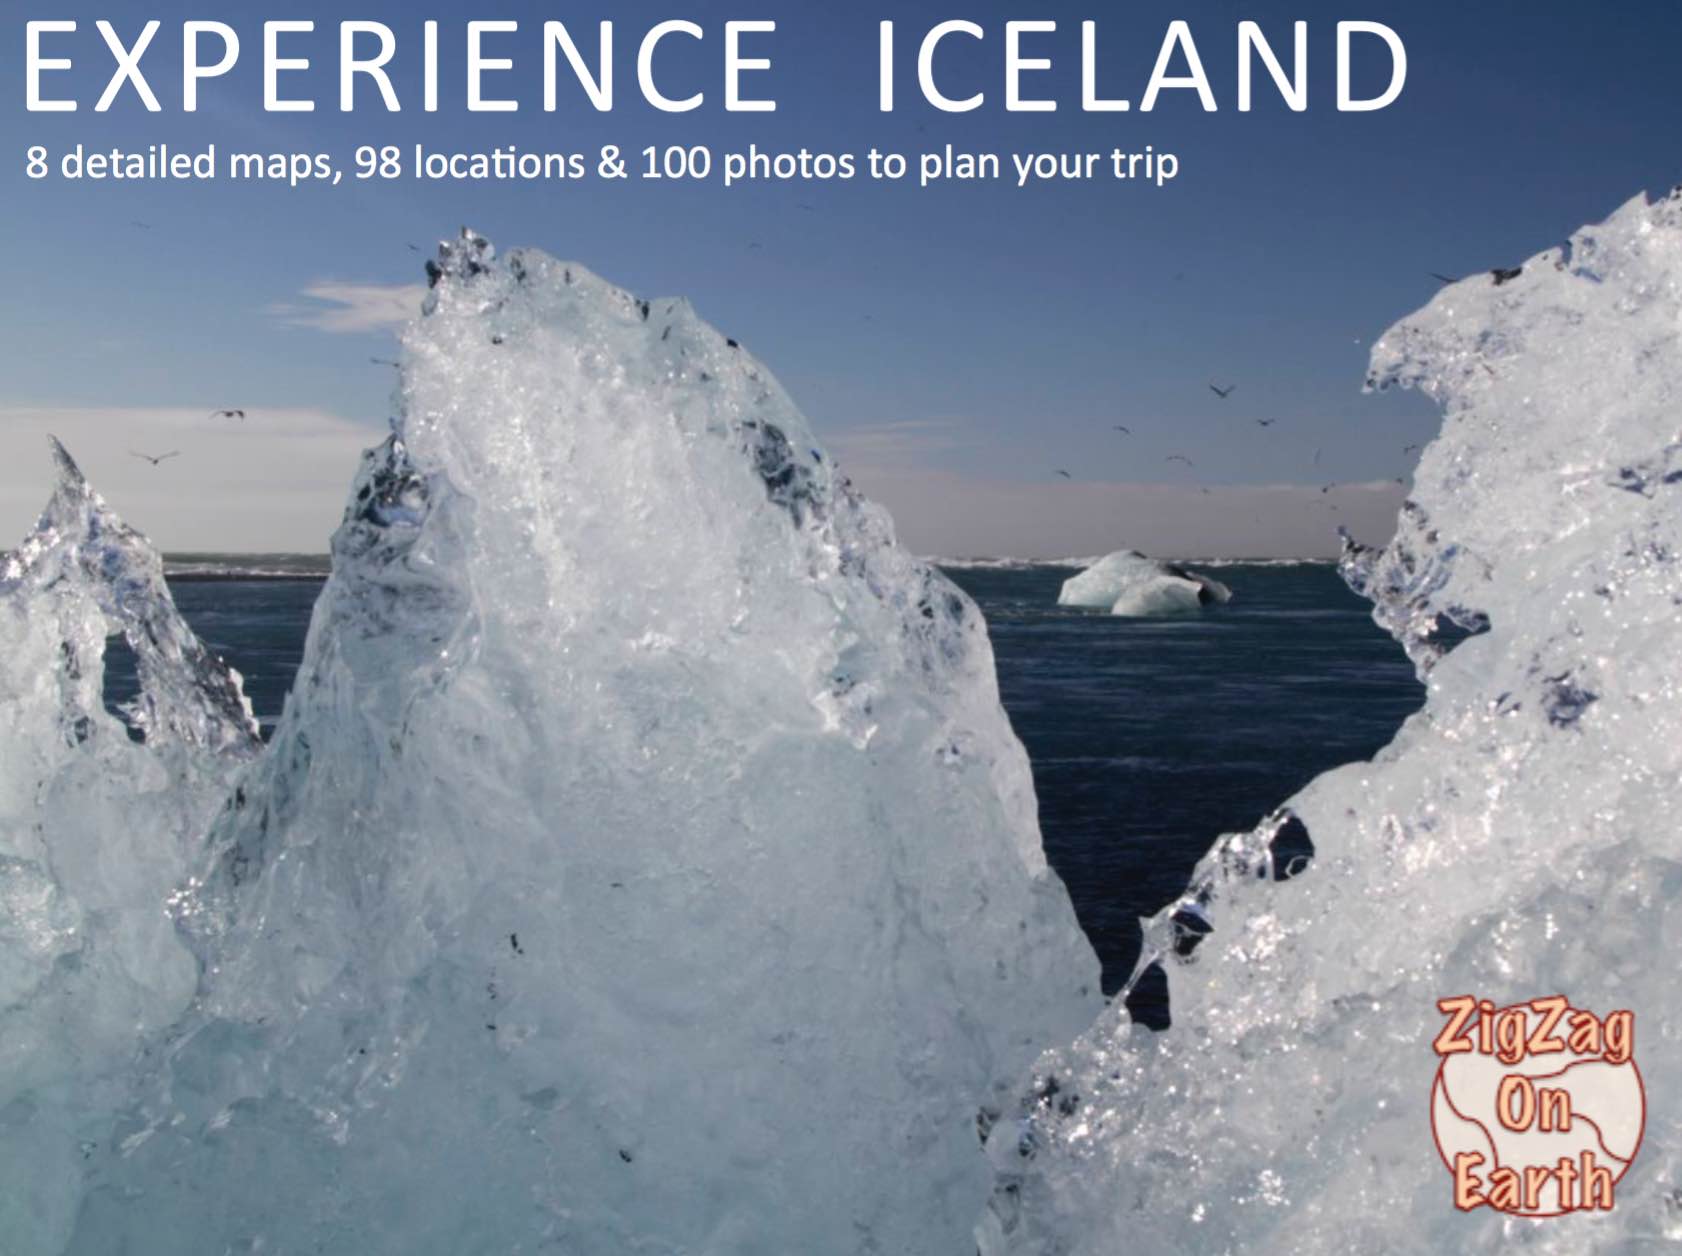 Experience Iceland Travel Guide eBook cover